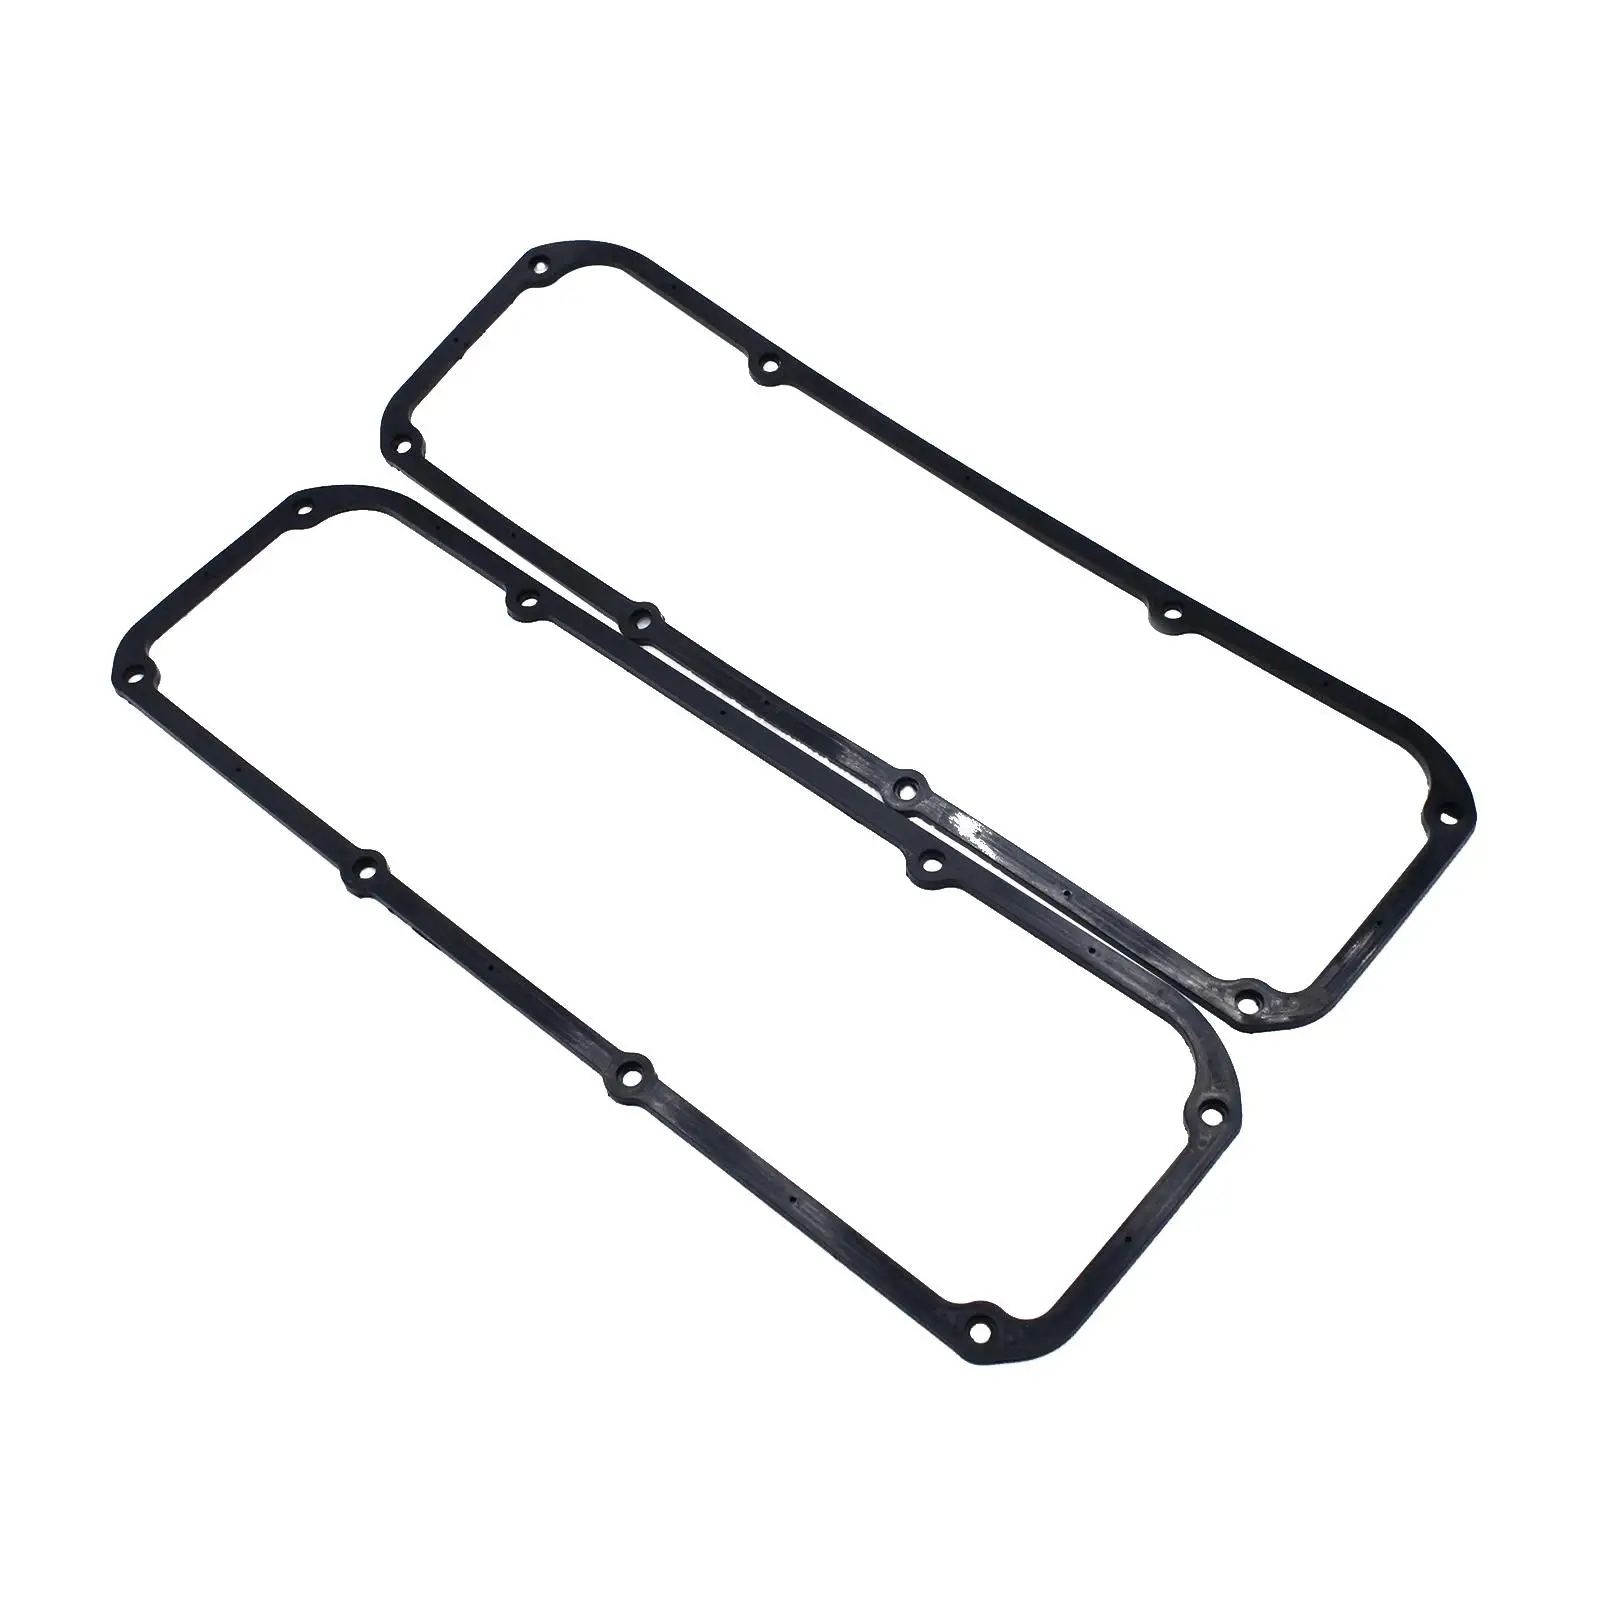 2x Cover Gaskets Kits Kmg02-1 with Steel Shim Core for Ford 351C 351M